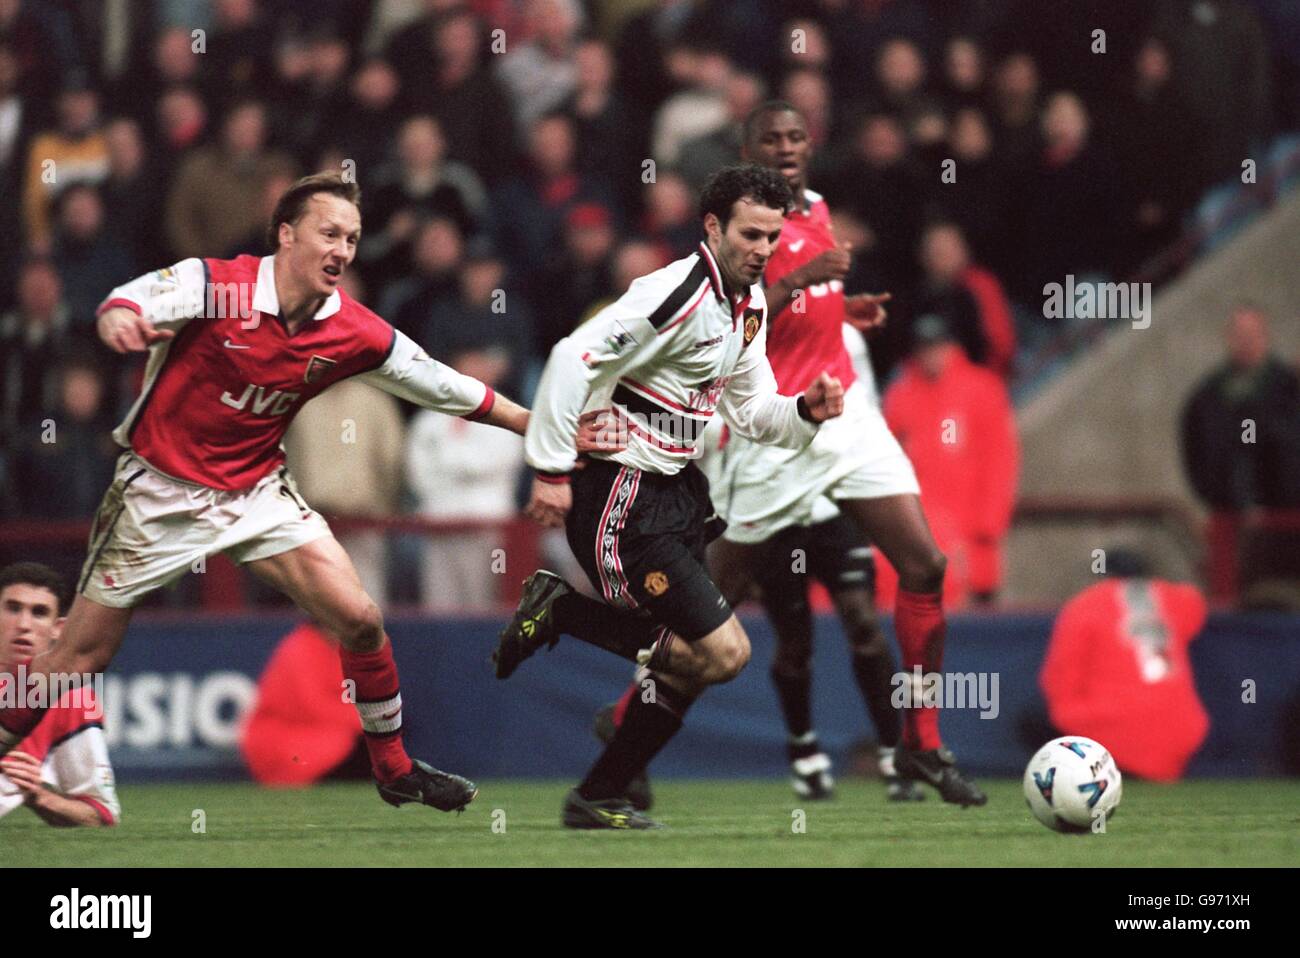 Soccer - AXA F.A. CUP semi-final replay - Manchester United v Arsenal. Manchester United's Ryan Giggs leaves Arsenal's Lee dixon trailing on his way to scoring the winning goal Stock Photo